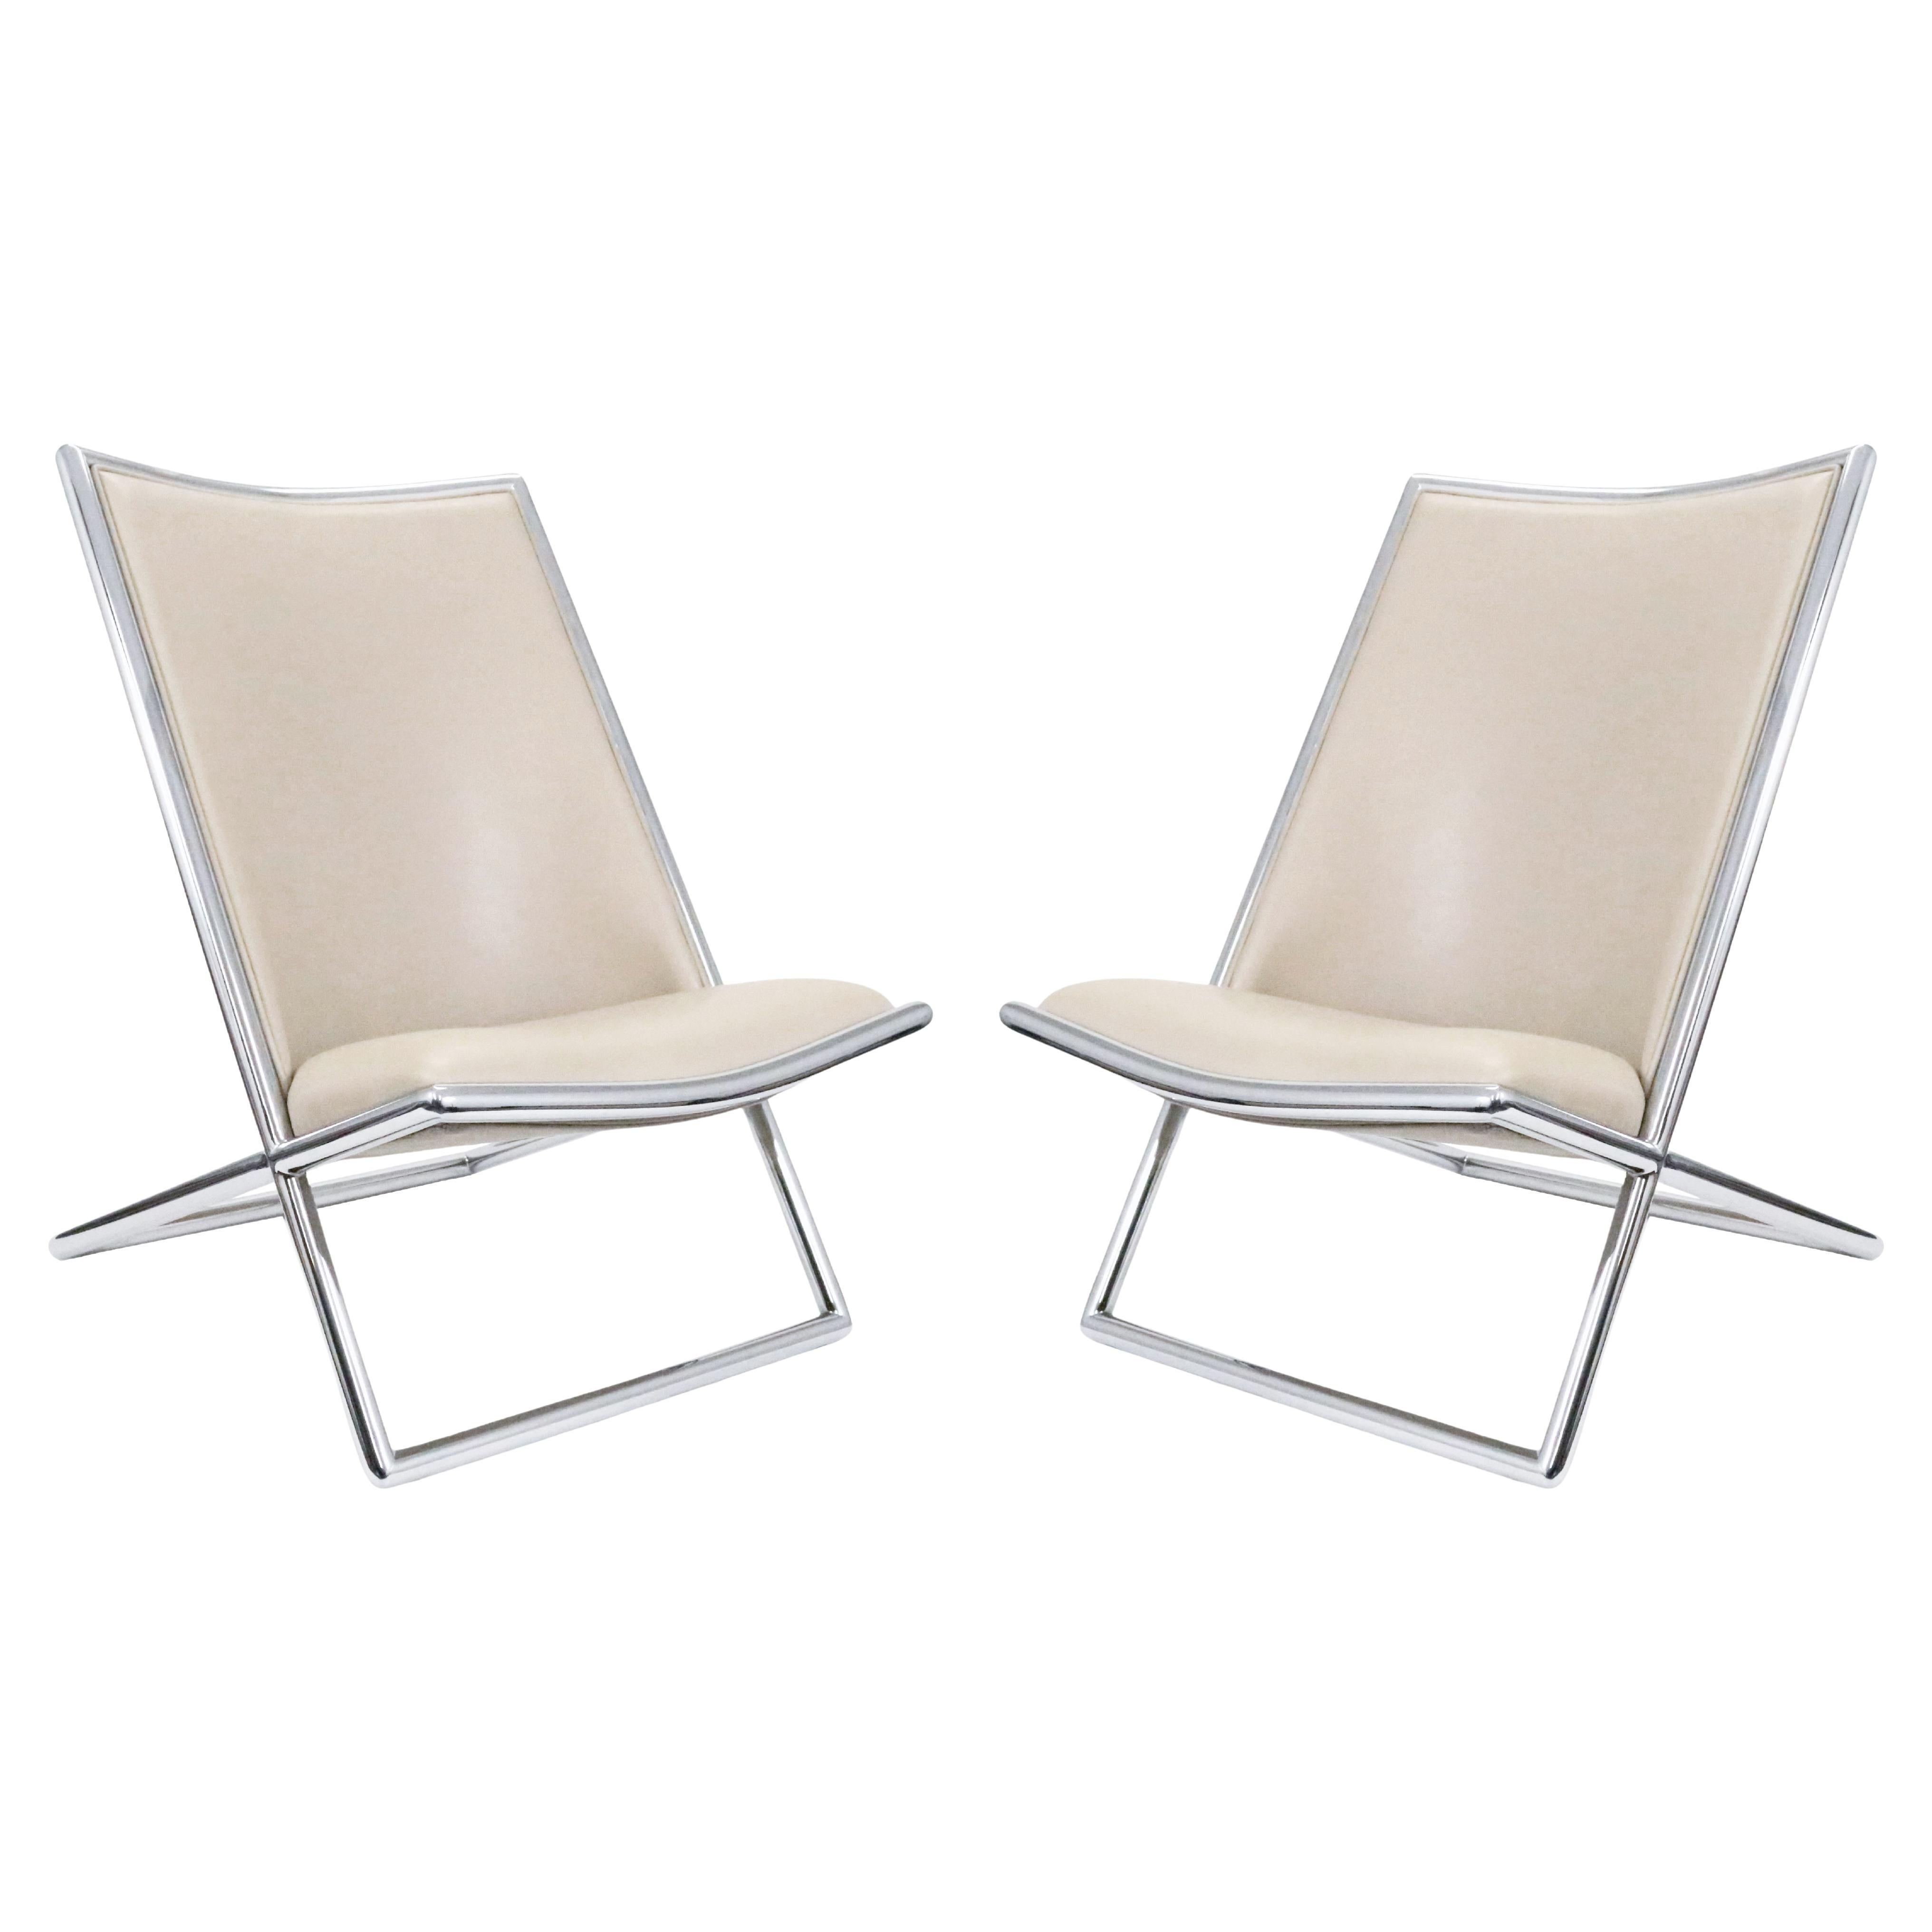 Ward Bennett "Scissor" Lounge Chairs for Brickel in Chrome and Beige Leather  For Sale